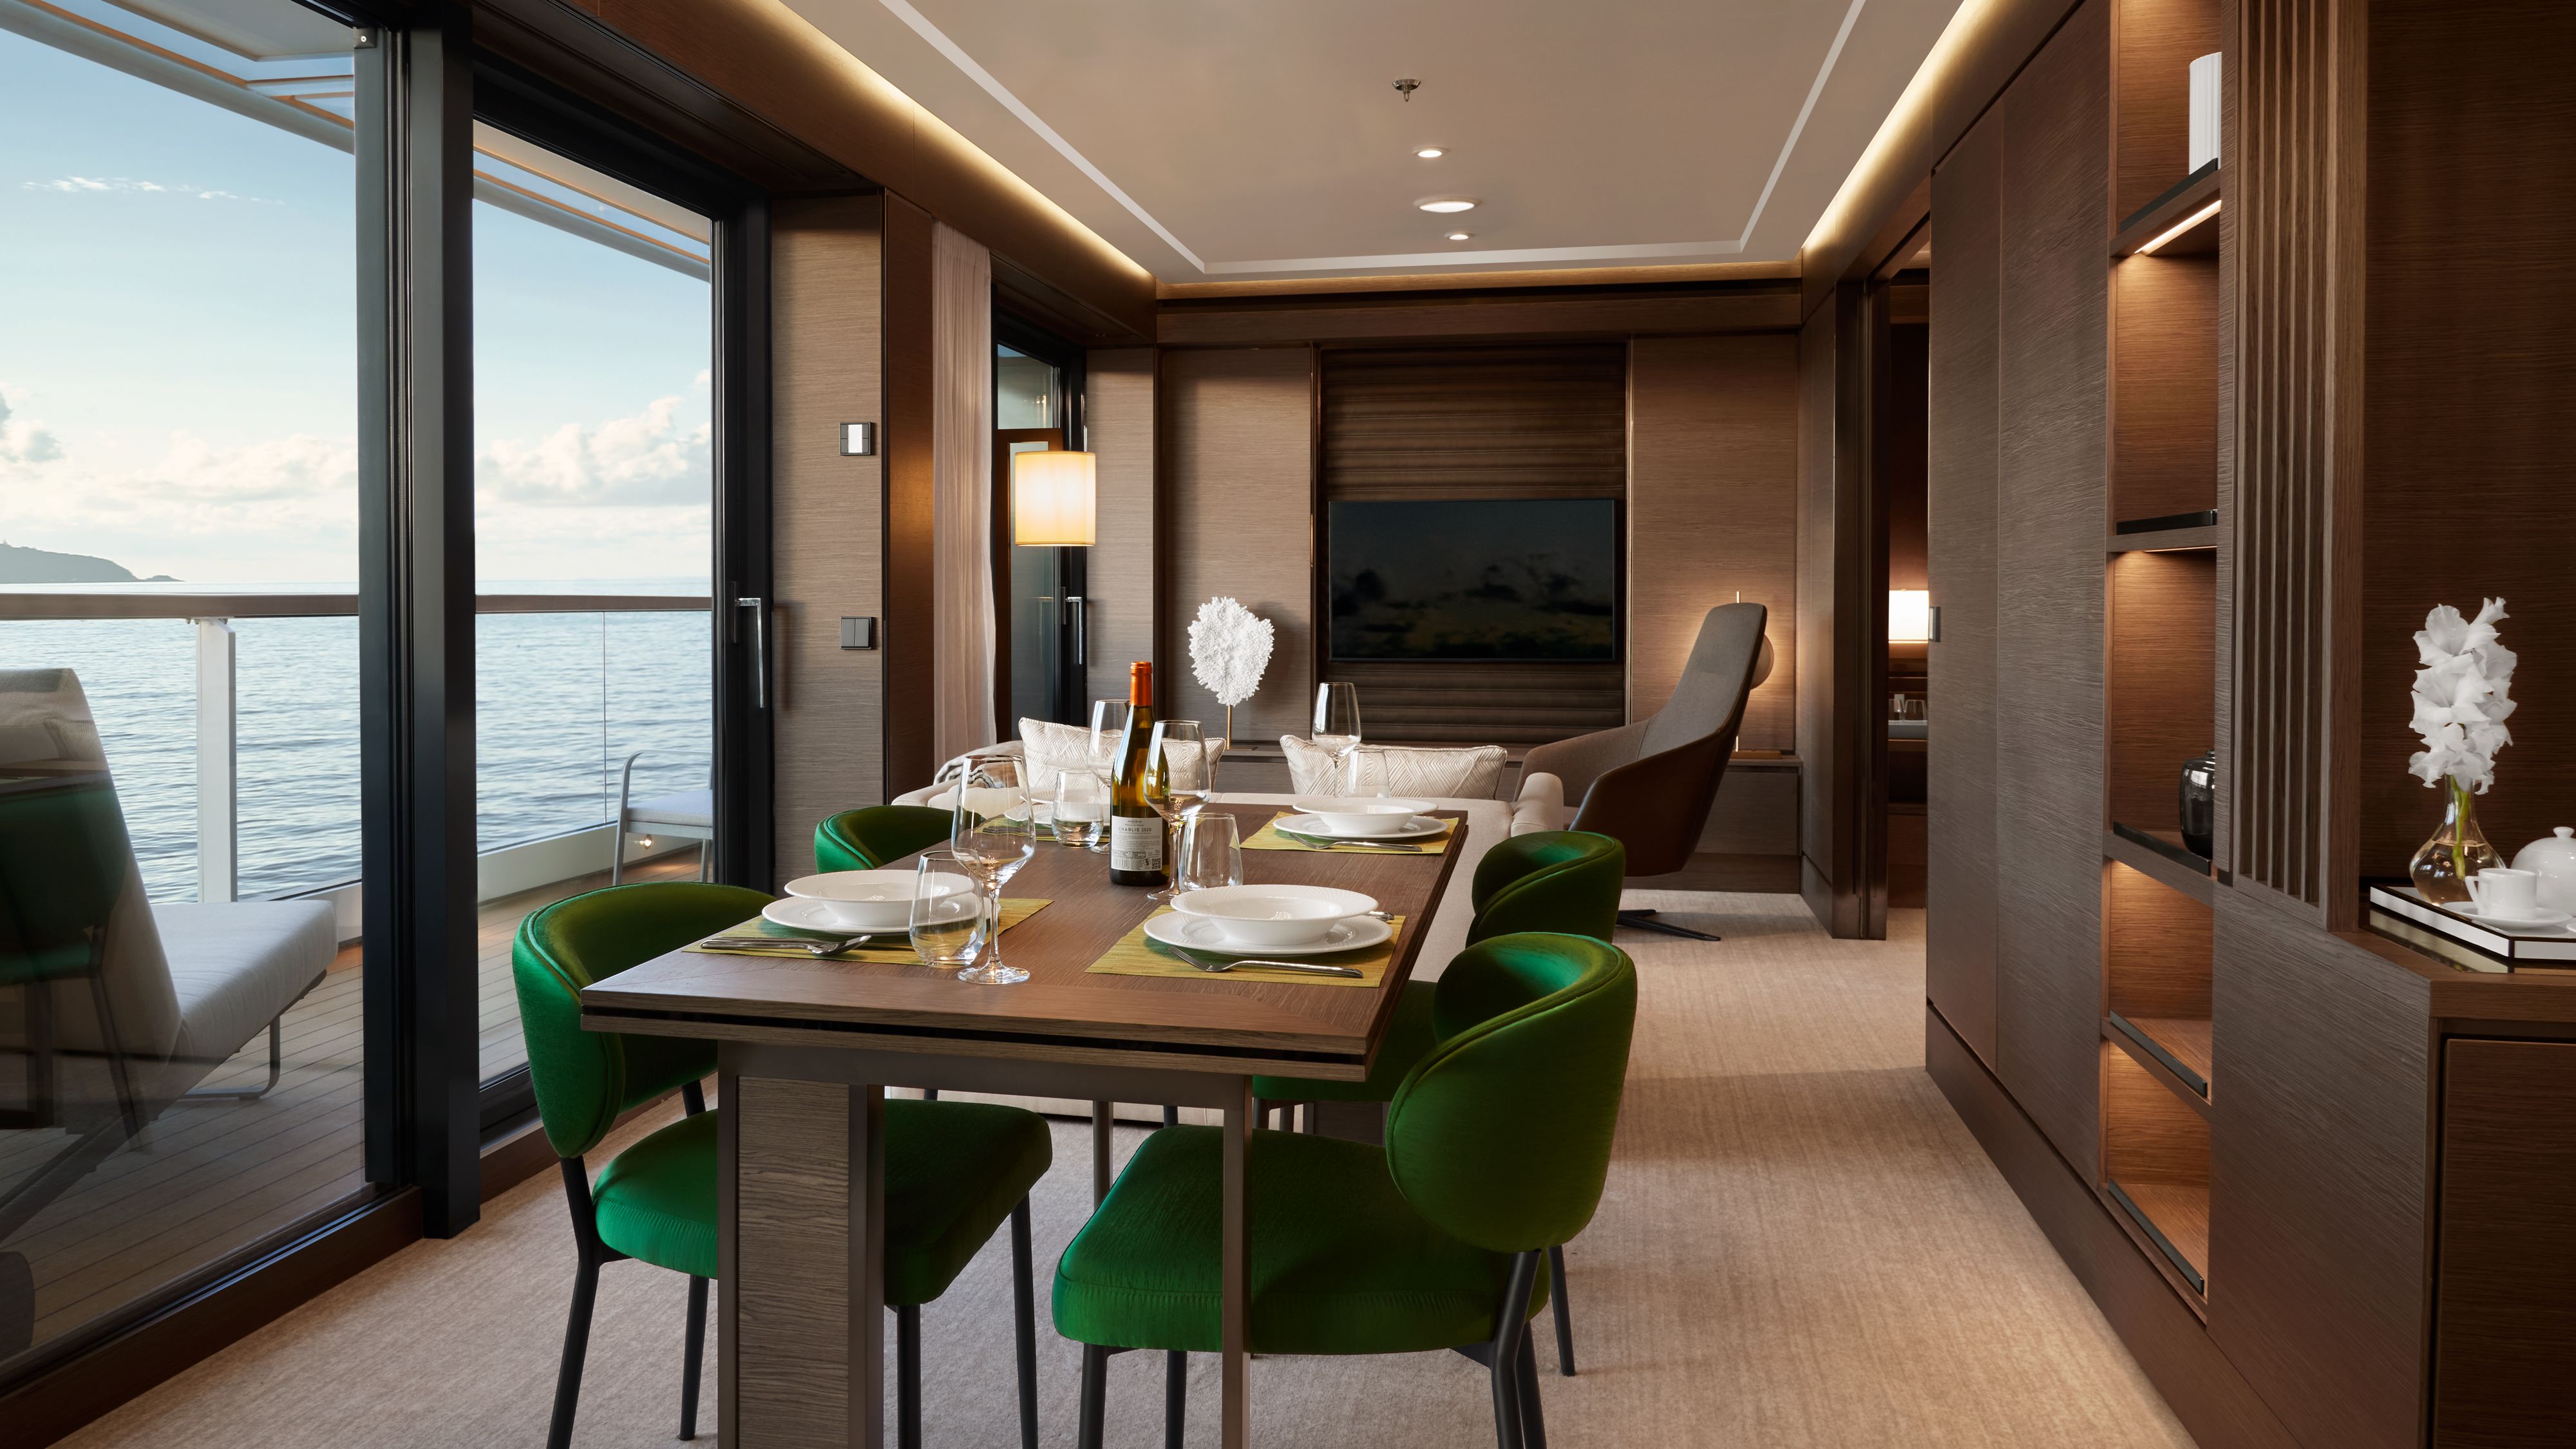 The Ritz-Carlton Yacht Collection, United States of America